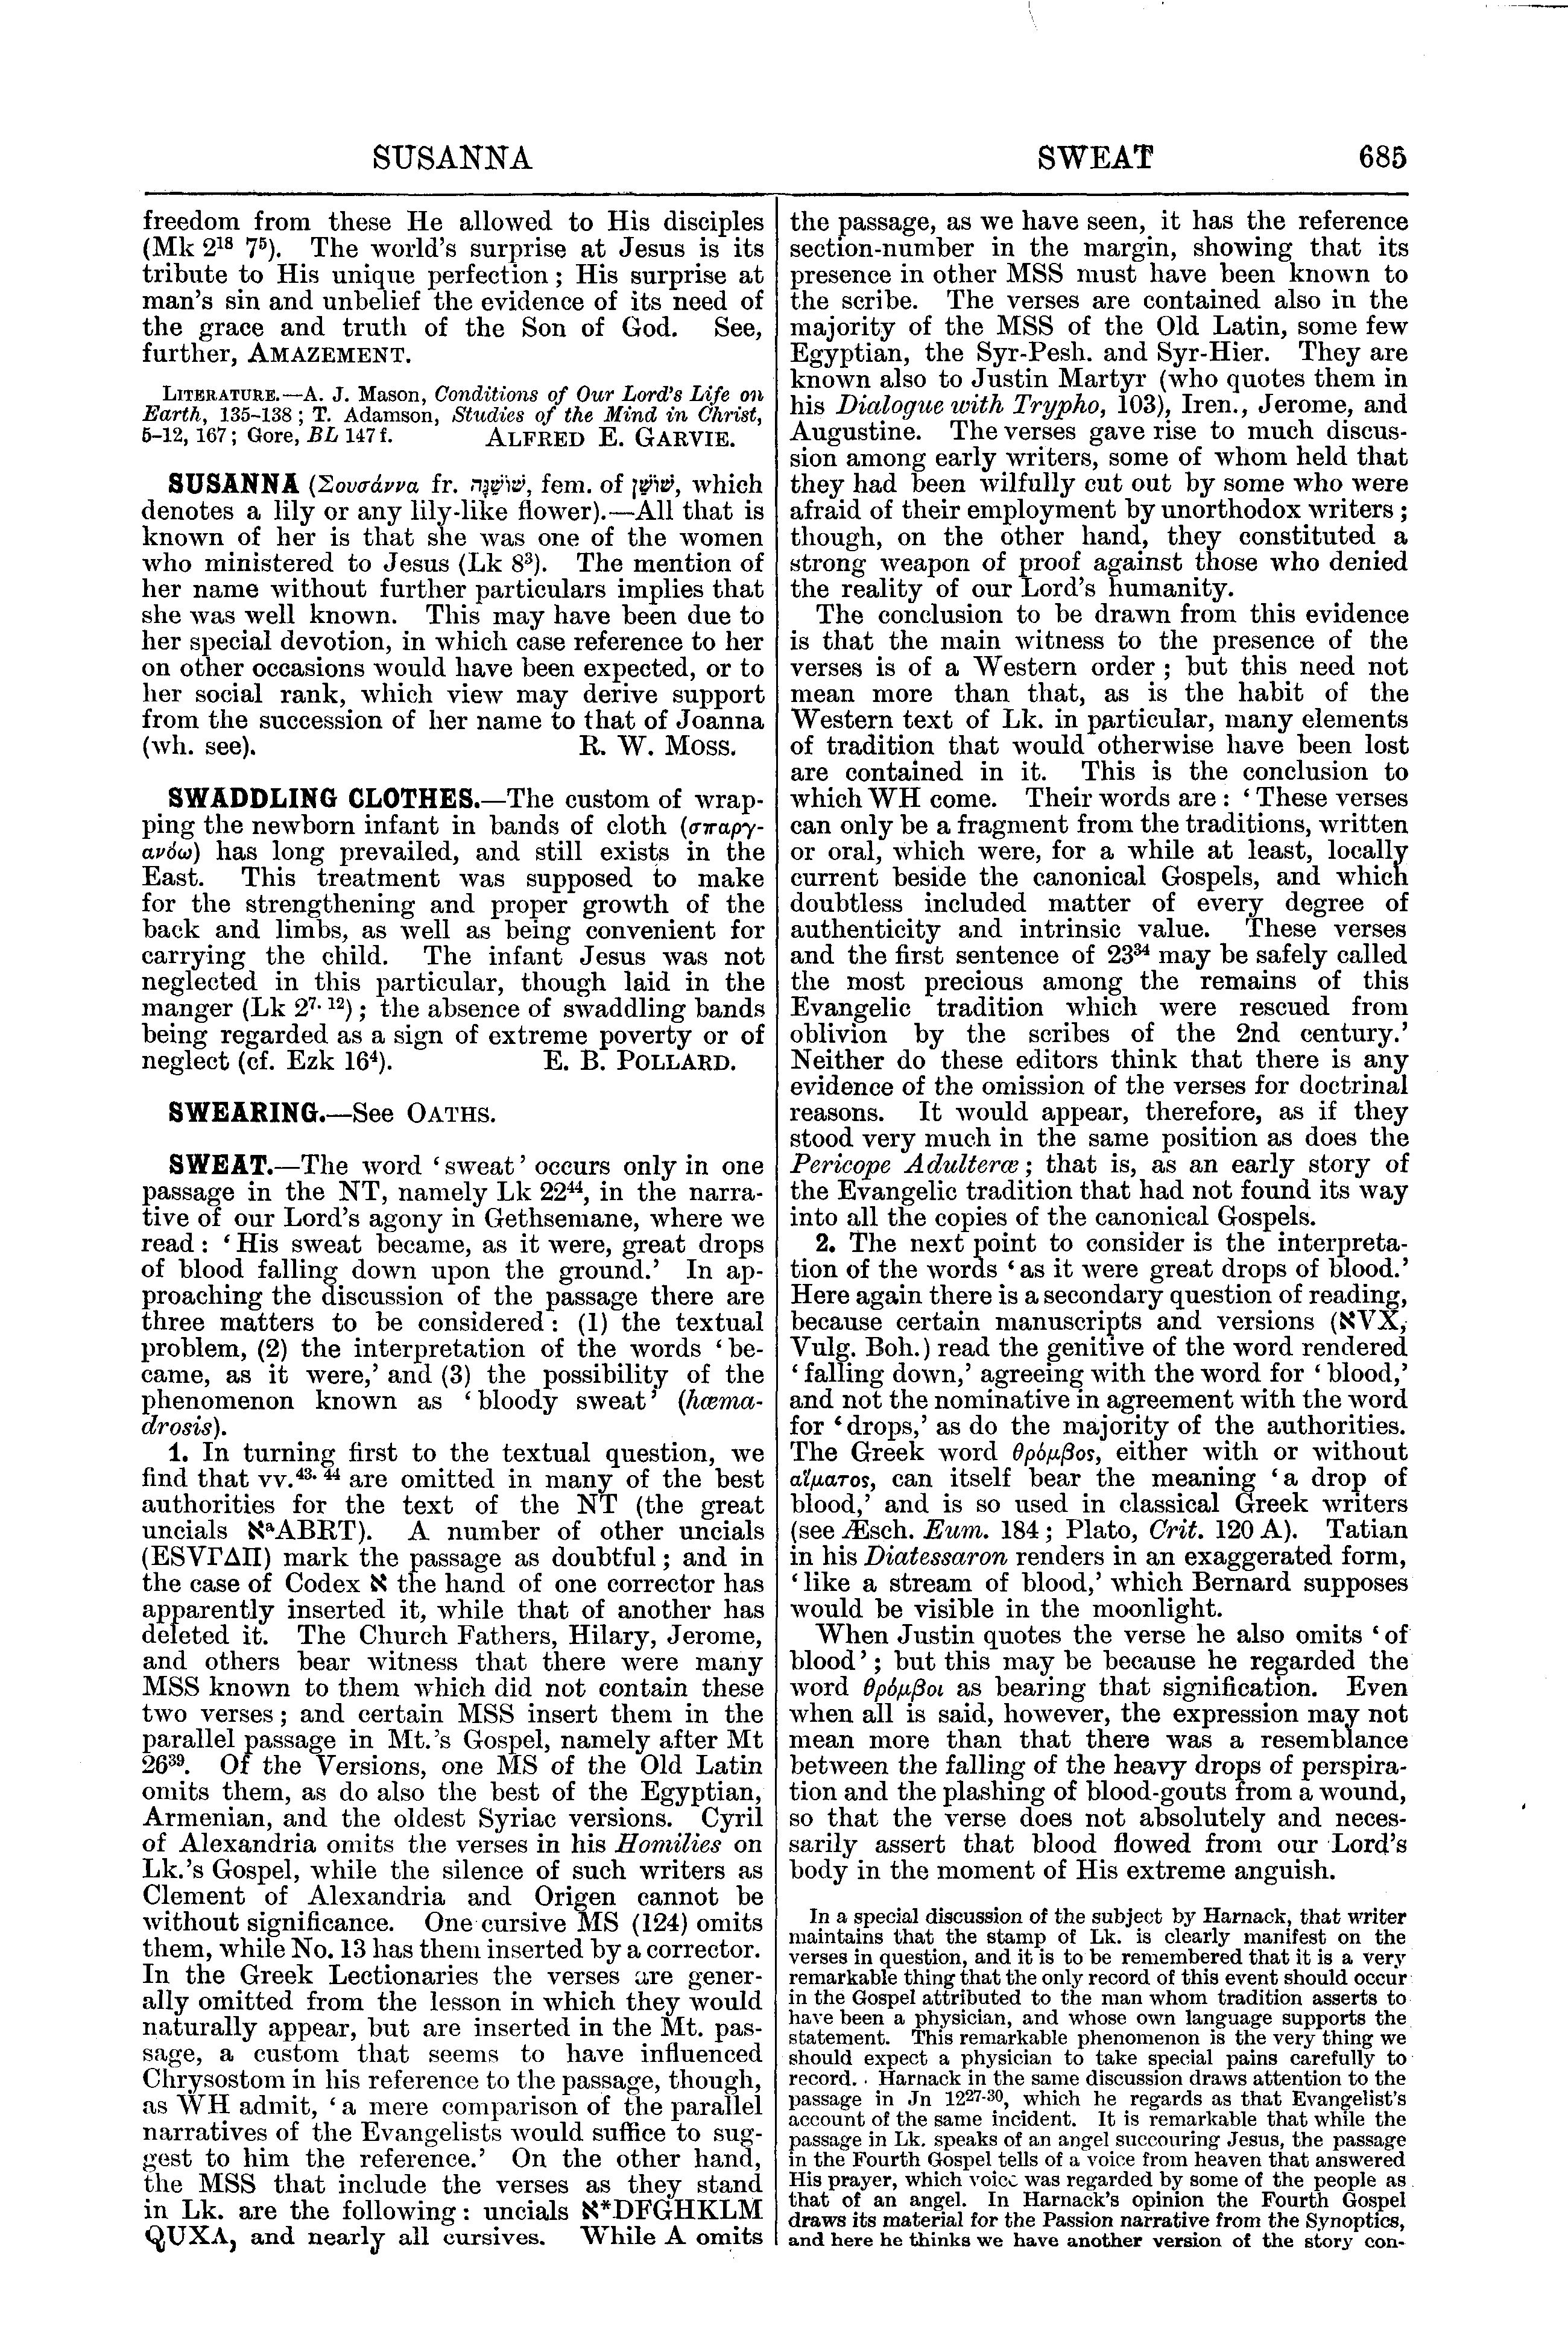 Image of page 685